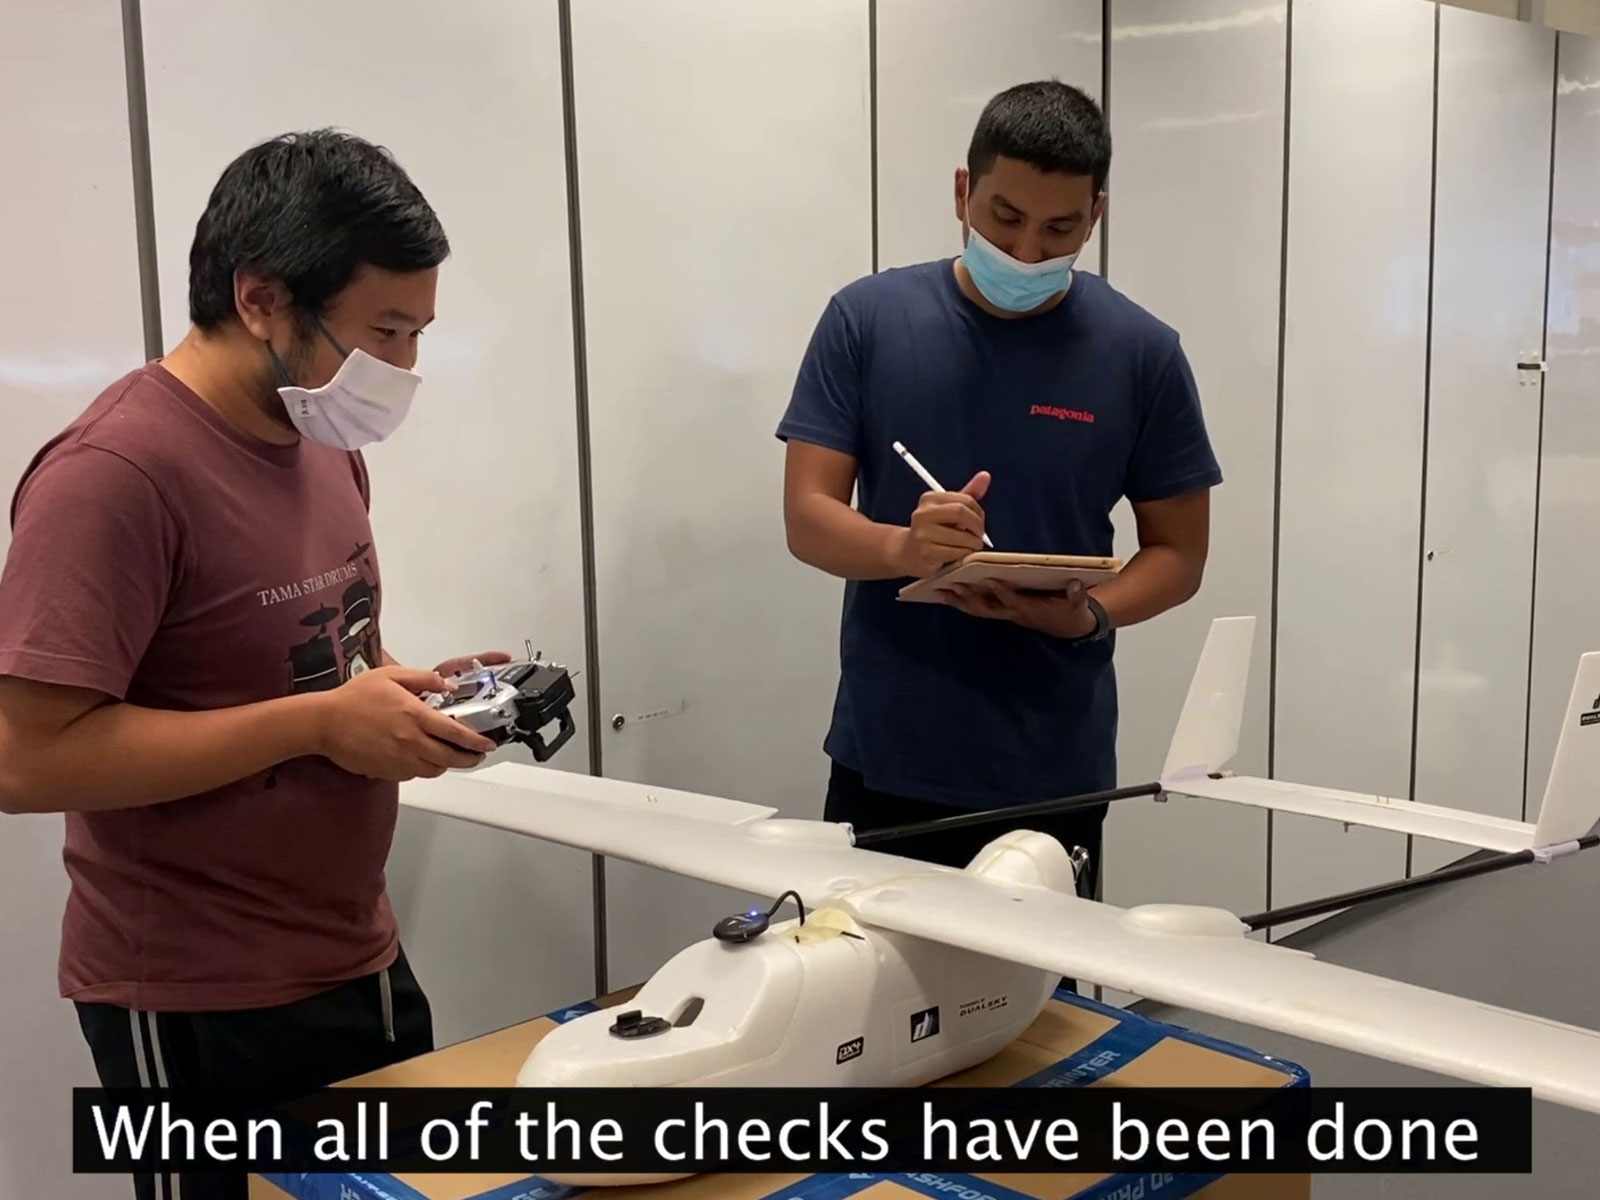 Two students stand next to a white drone while working on it